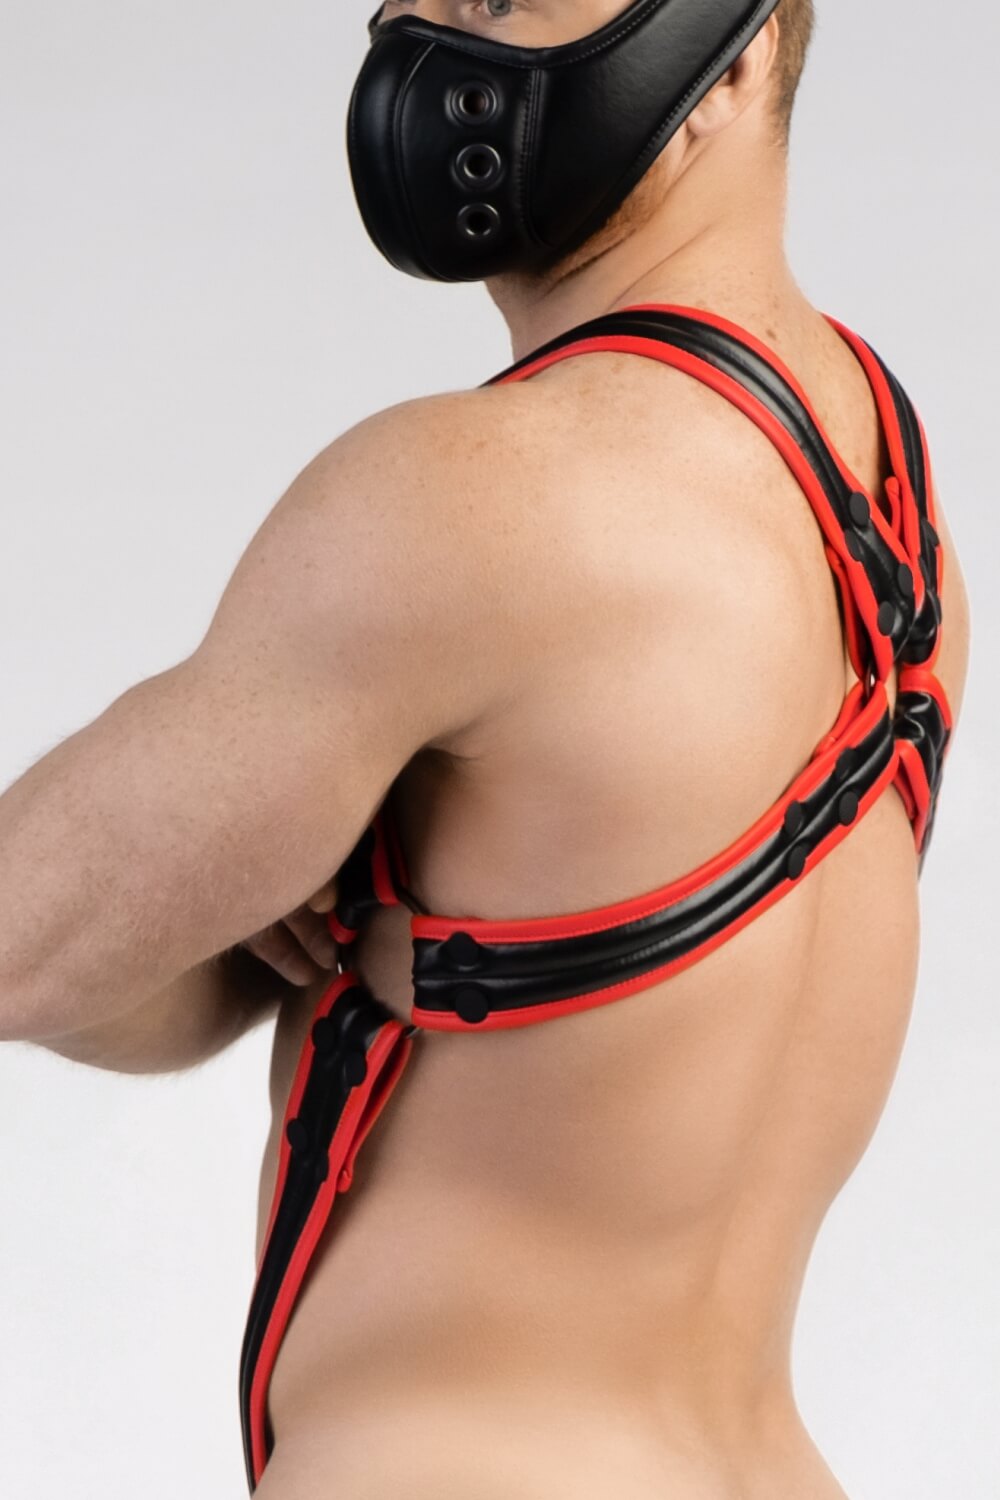 Armored Next. Body Harness. Black+Red